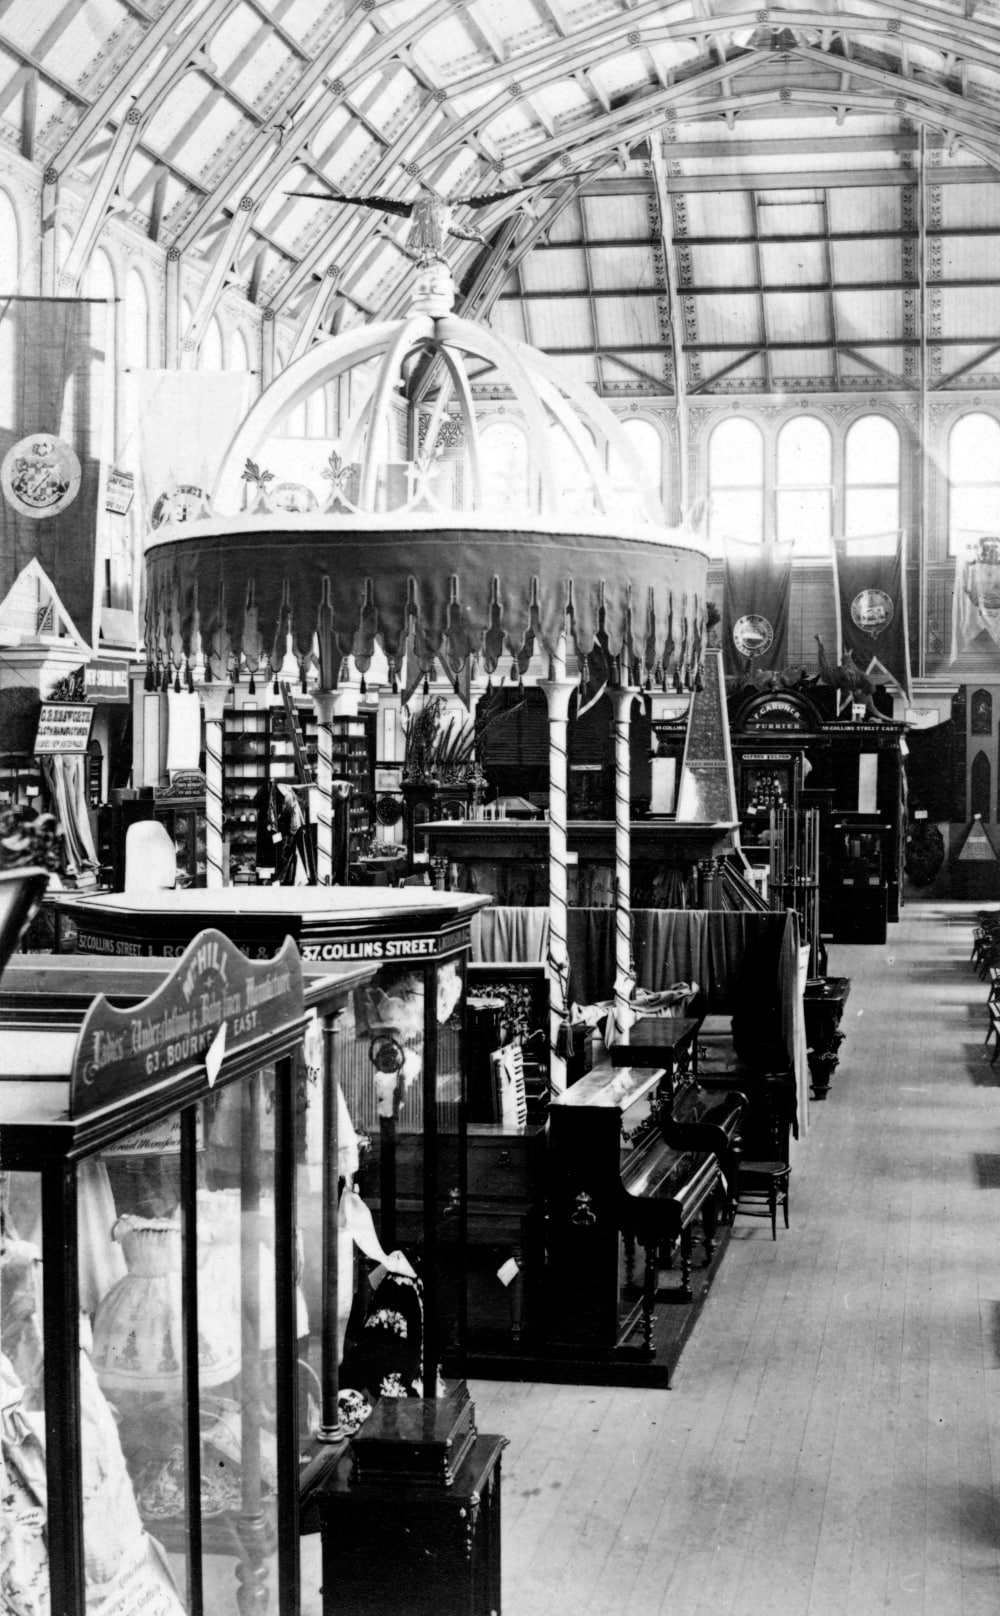 Great Hall, Intercolonial Exhibition, Melbourne, 1866-67, with displays of pianos; State Library of Tasmania